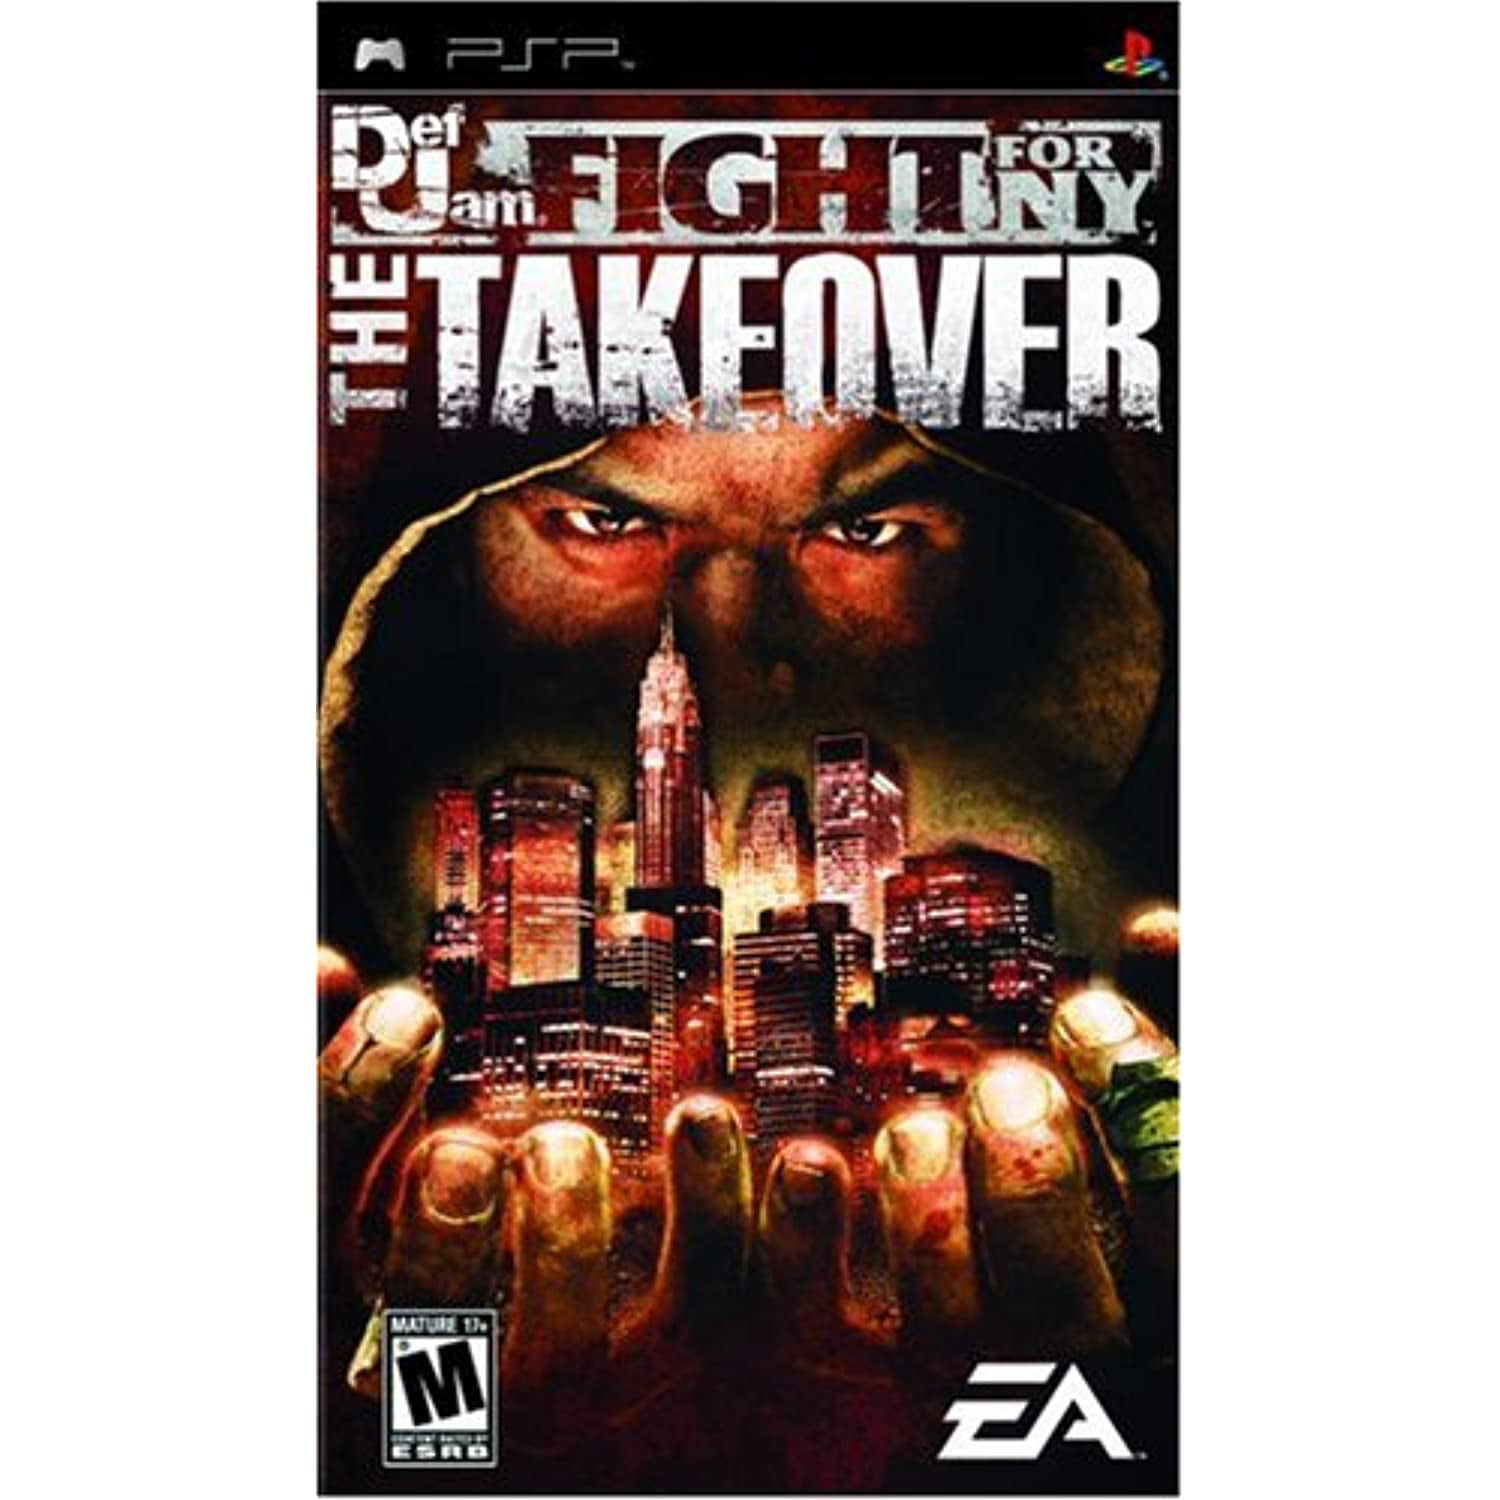 Def Jam: Fight for NY - The Takeover (Europe) PSP ISO - CDRomance